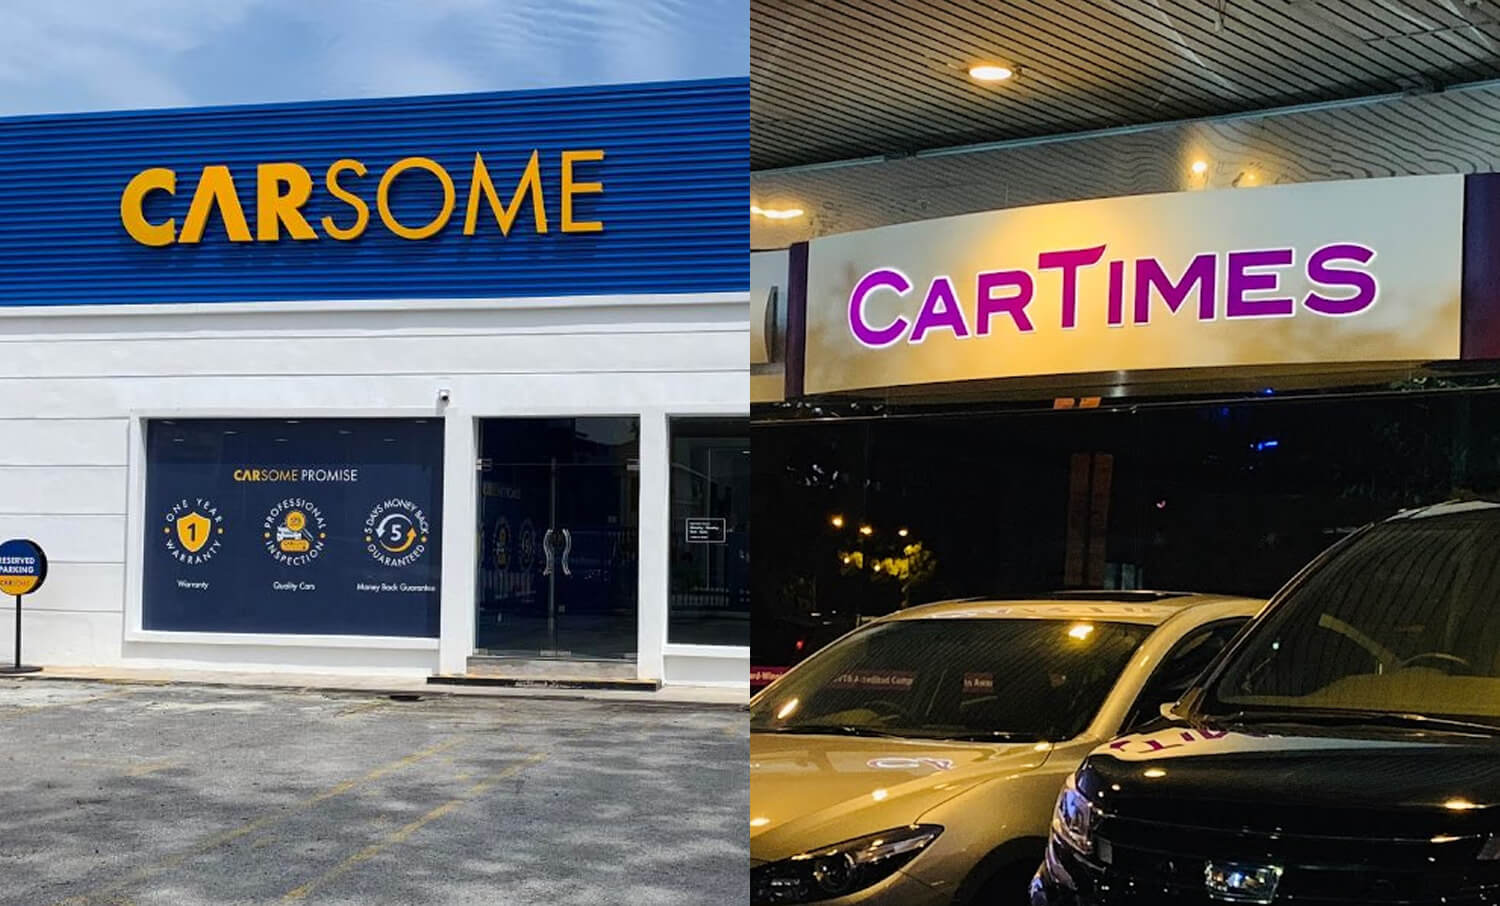 Daily Markup #463: Carsome expands in Singapore with 51% acquisition of CarTimes; EMQ enhances services in Pakistan & South Korea; Aerodyne partnership to elevate drone solutions with 5G